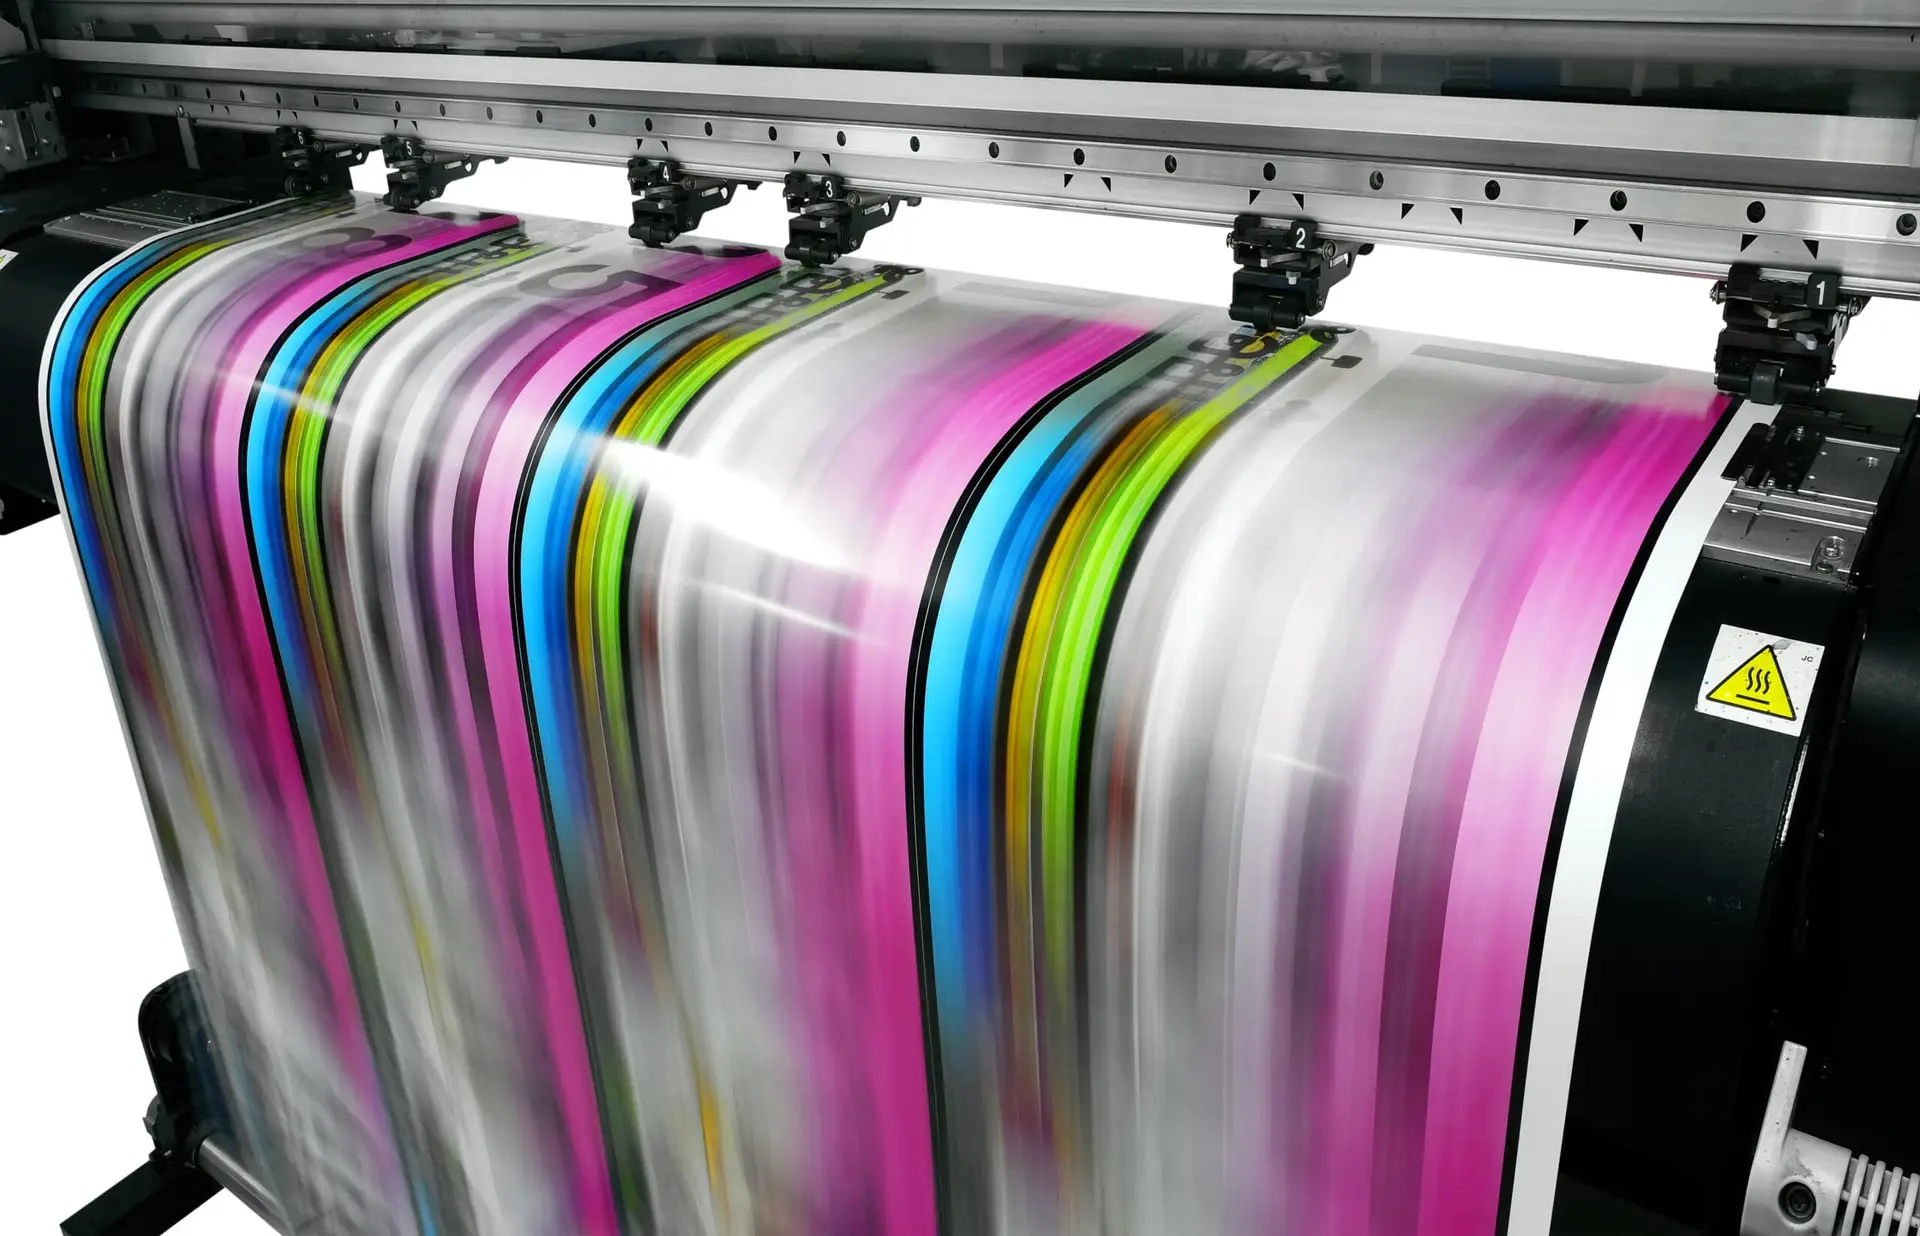 a large printer with colorful stripes